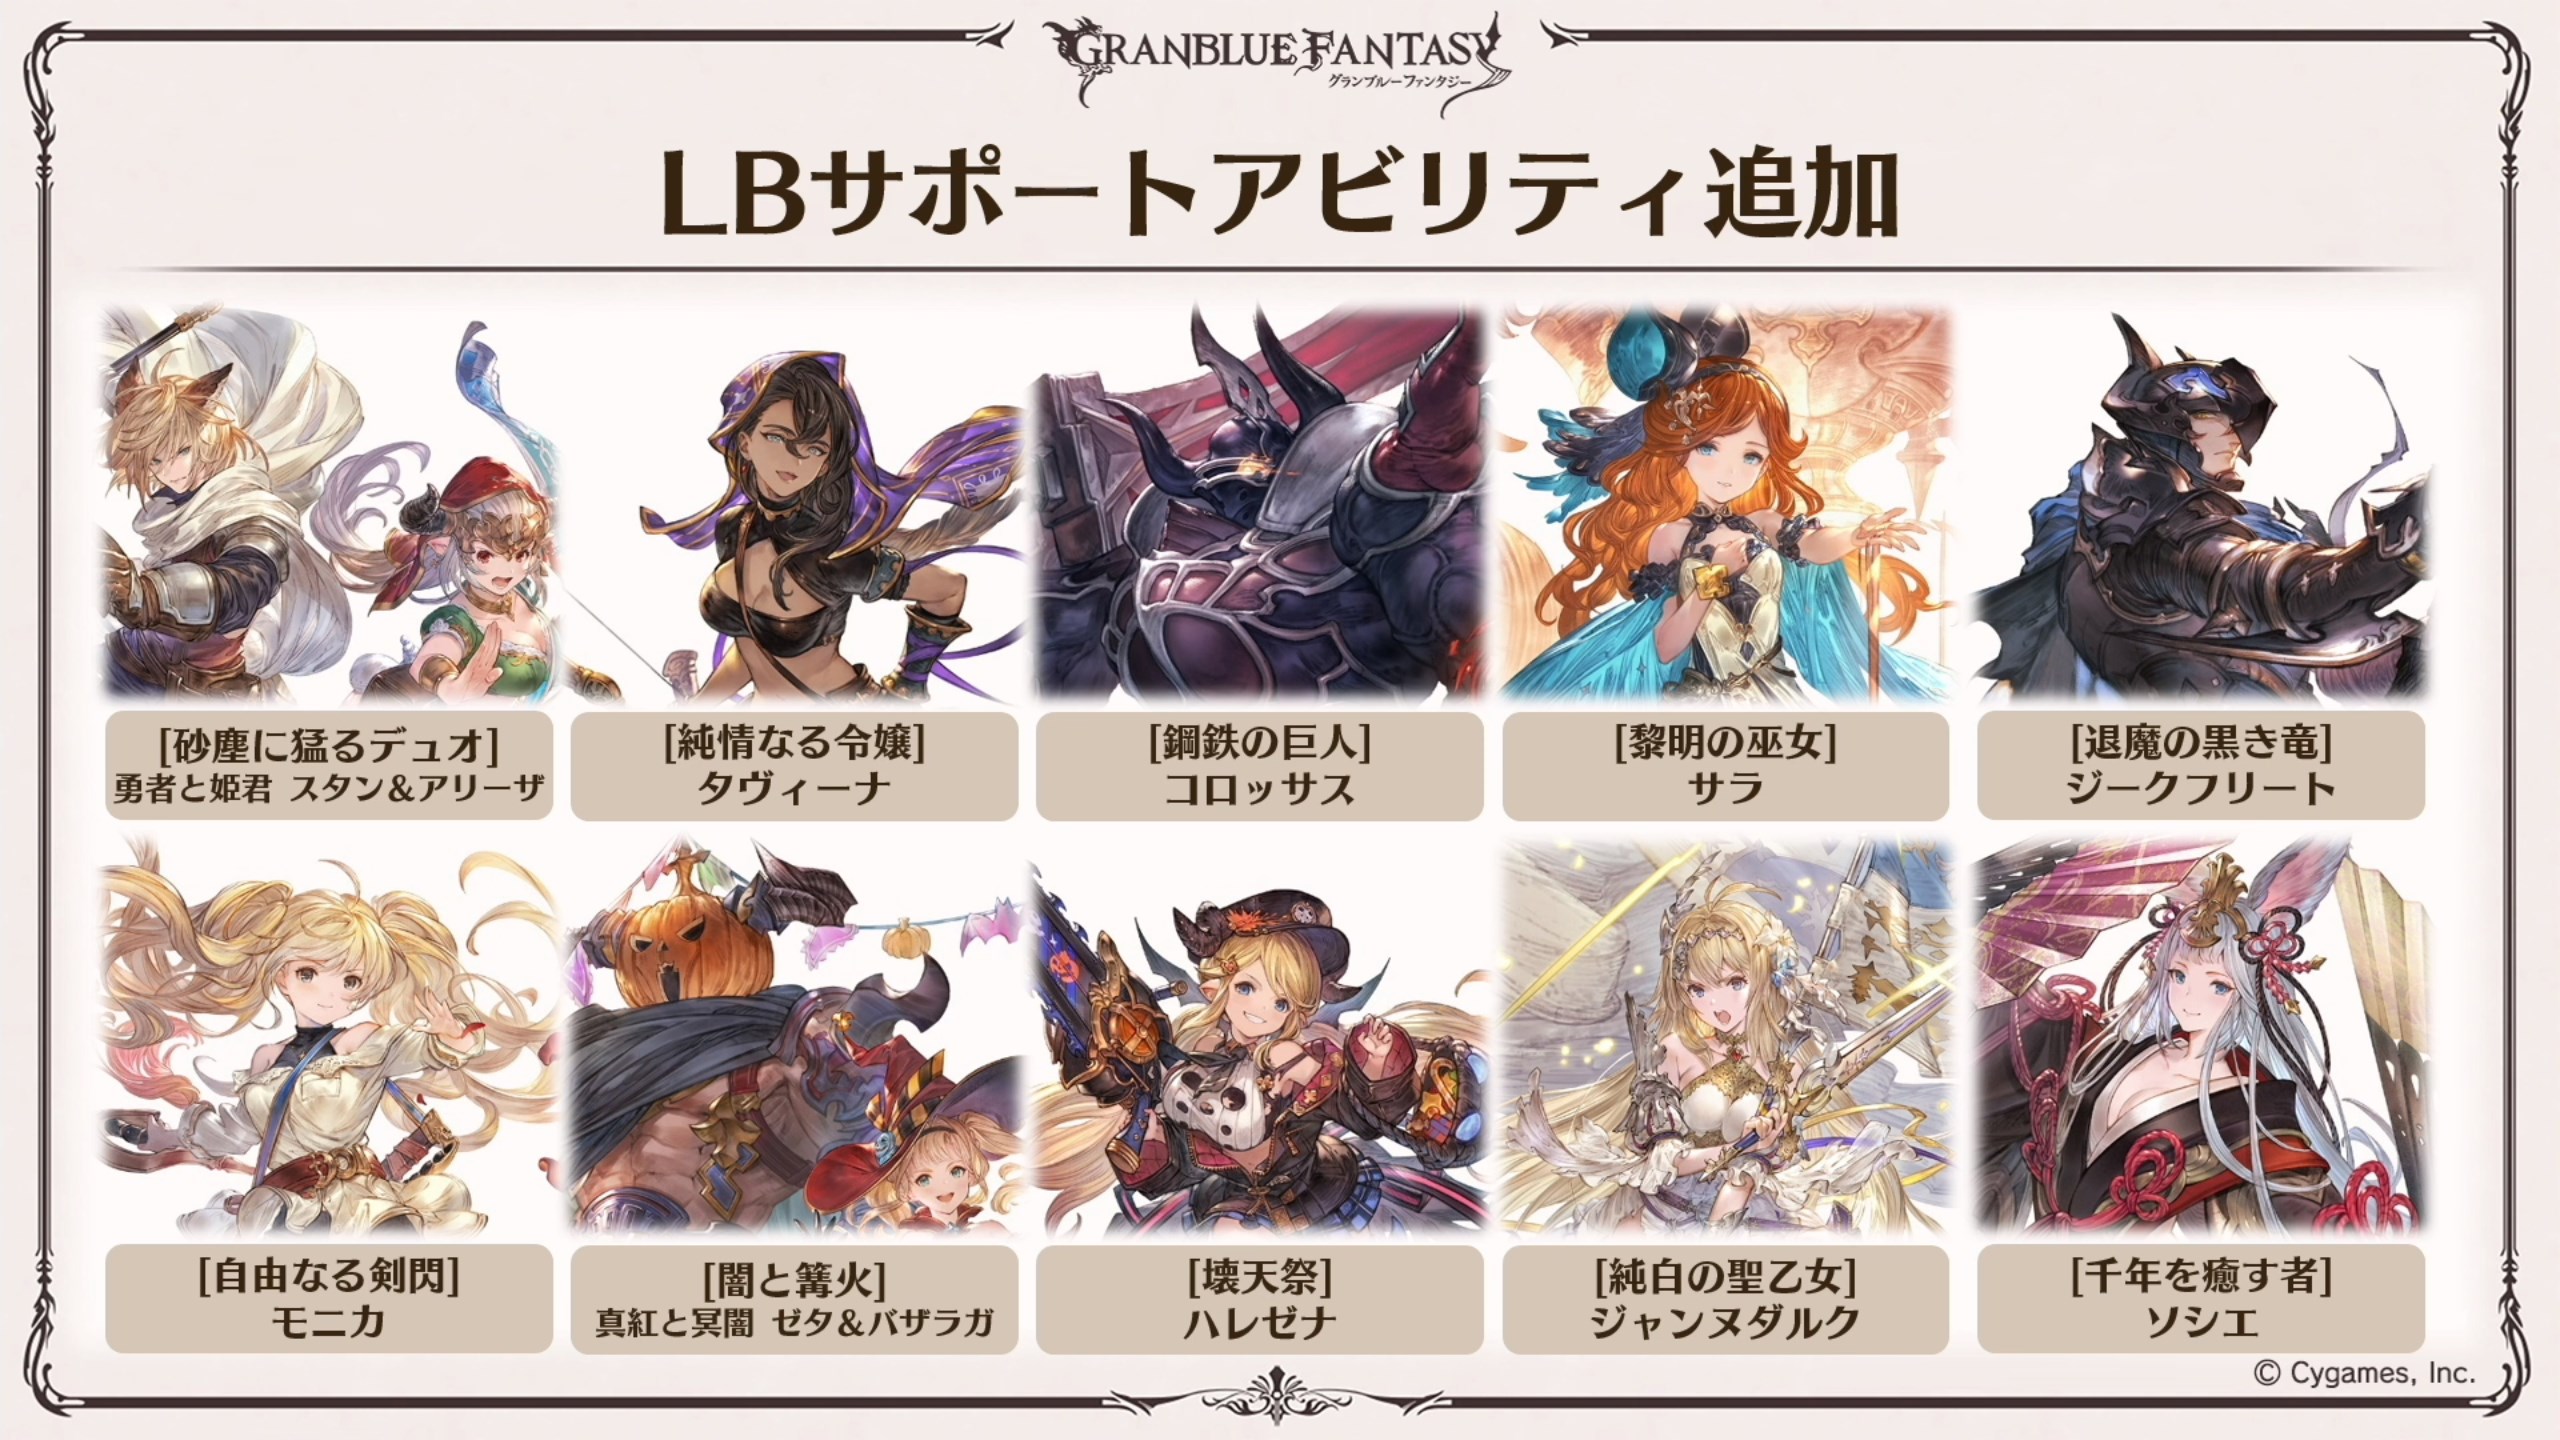 Granblue En Unofficial New Emp Support Skills For 23 Characters Ssrs 3 Srs 4 6 Corrected Thread T Co Qomr6fus Twitter